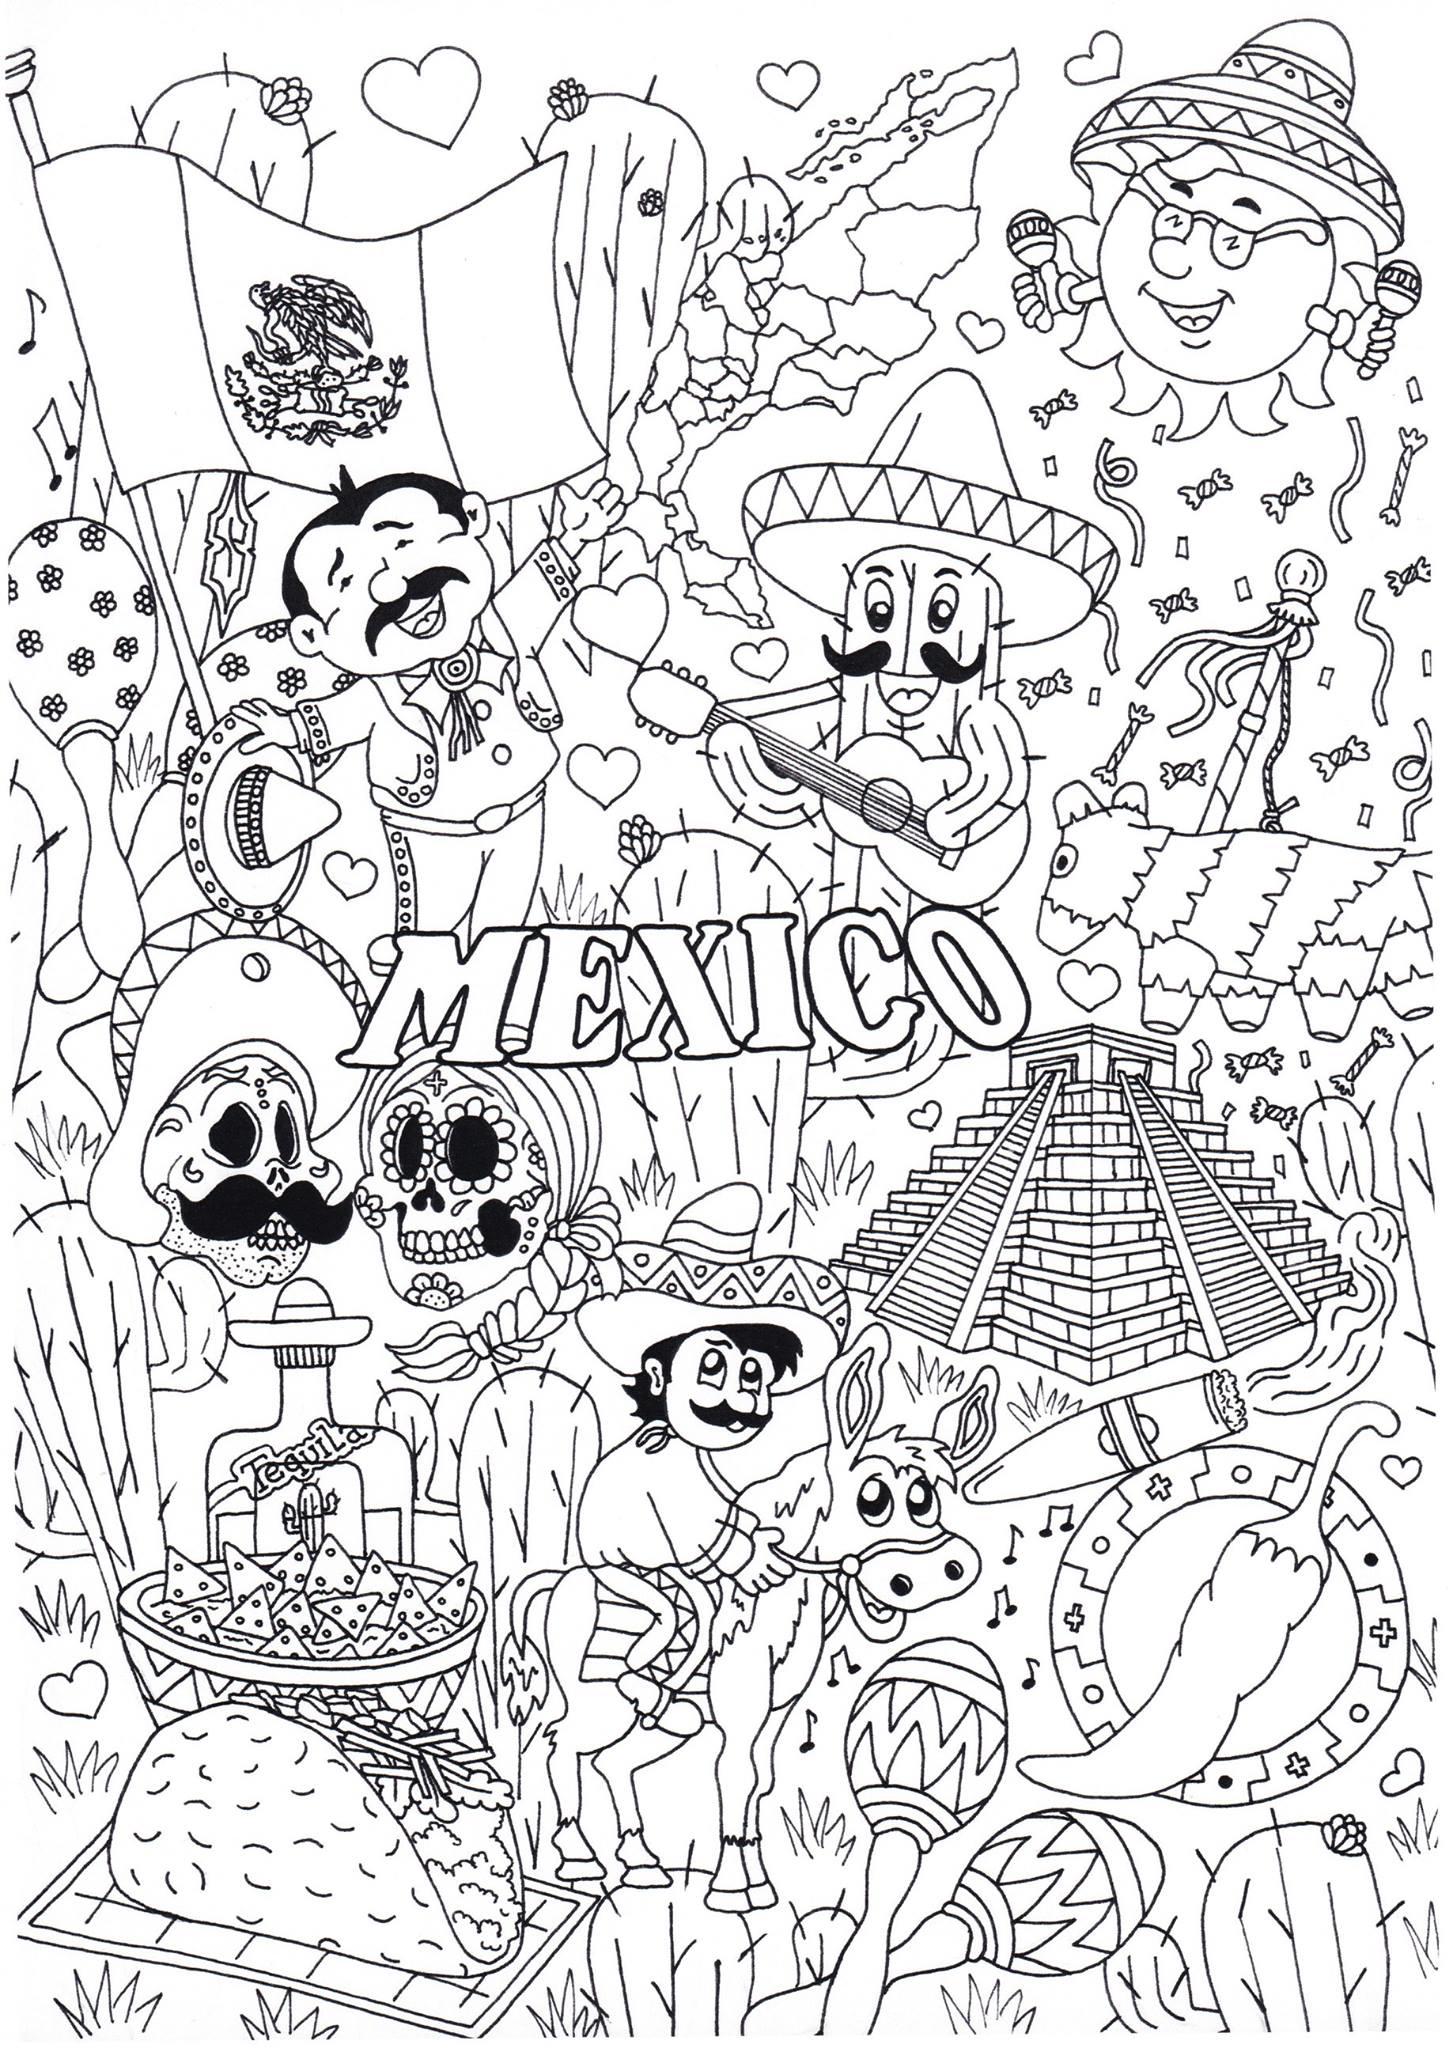 Coloring Page Mexico - free printable coloring pages - Img 31324